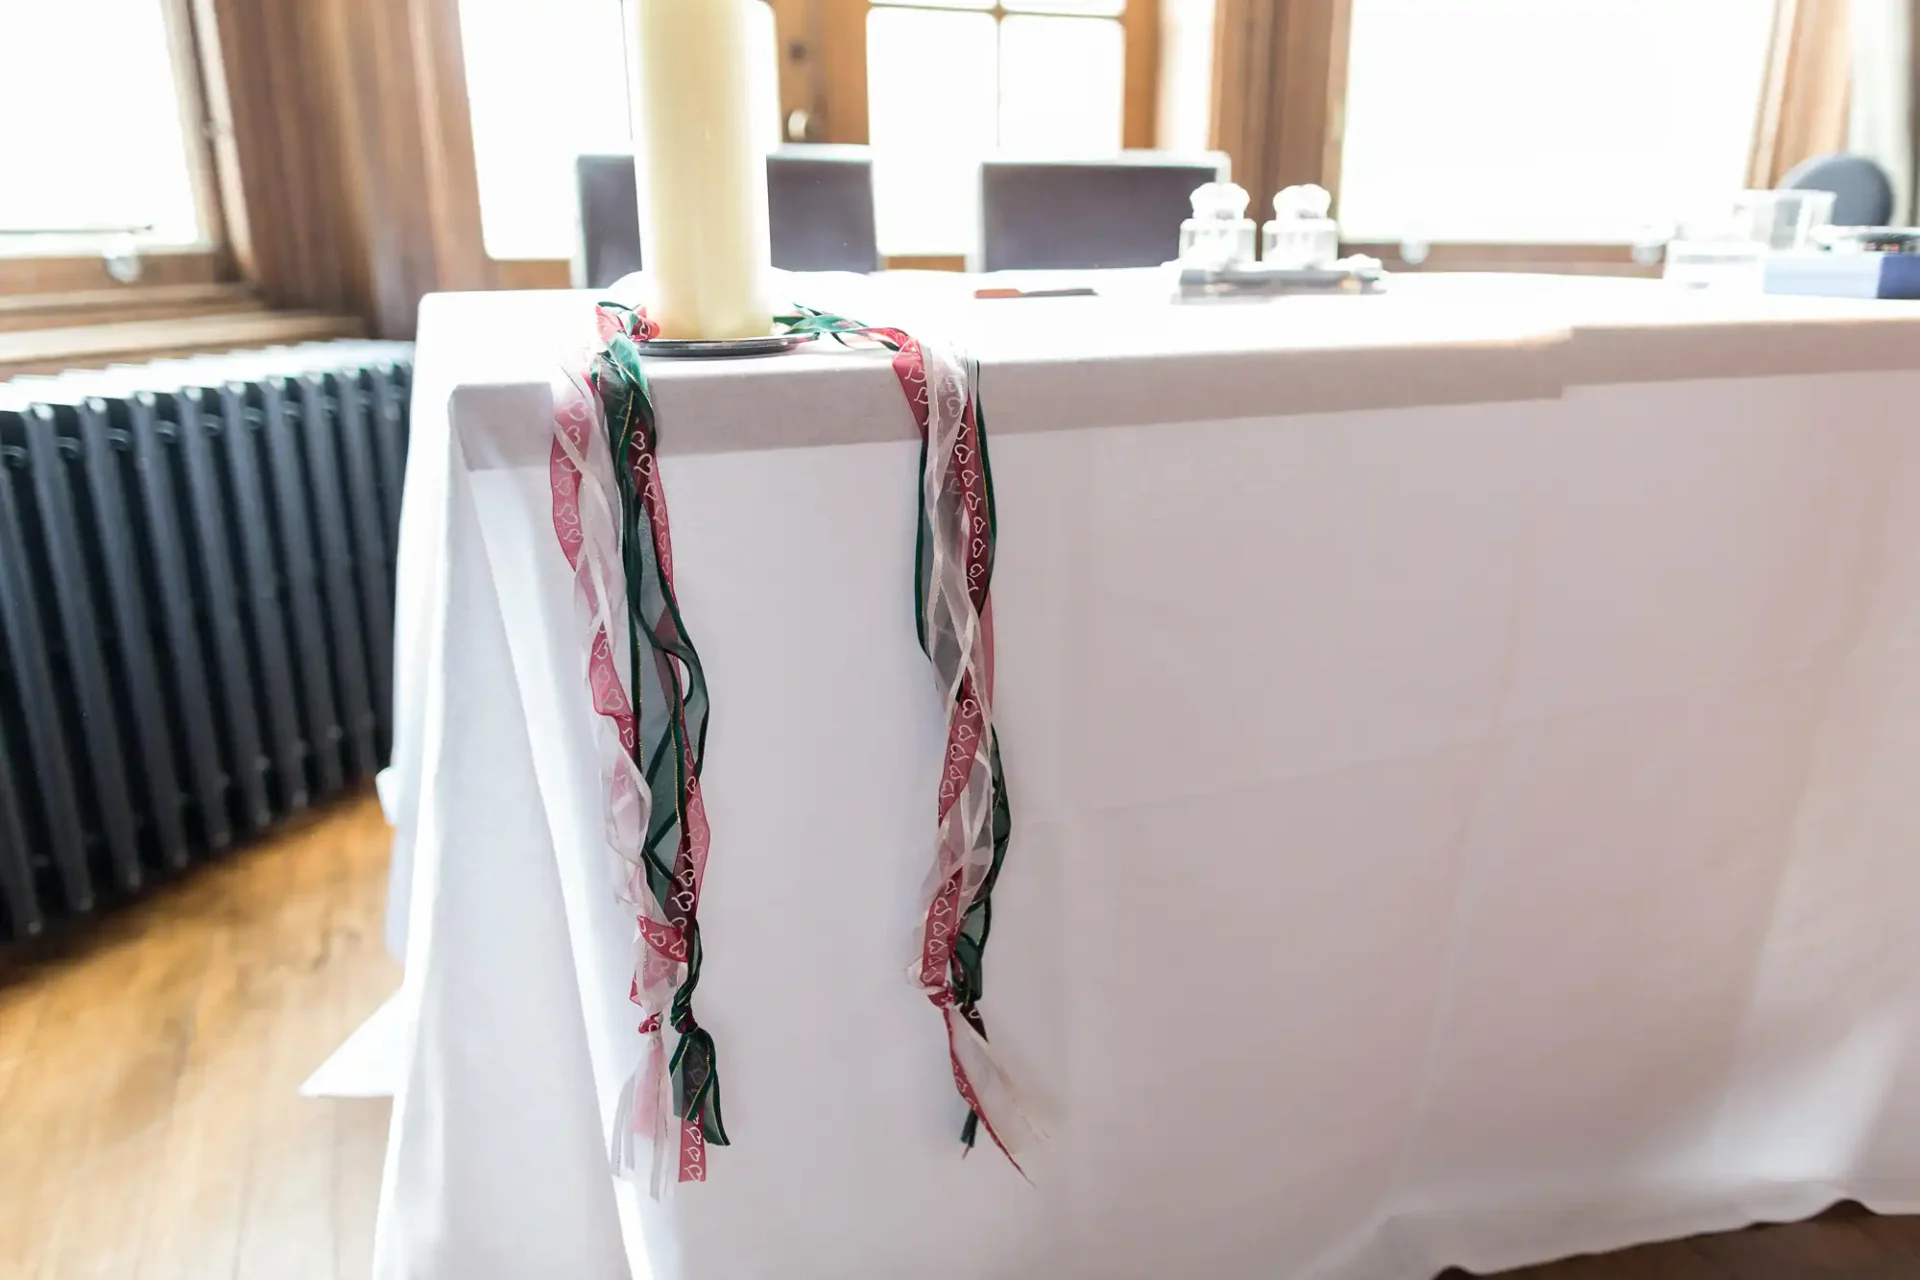 A white tablecloth covers a long table with a decorative ribbon tied to one corner, and items like a candle and stationery set on top, in a room with wooden floors and large windows.